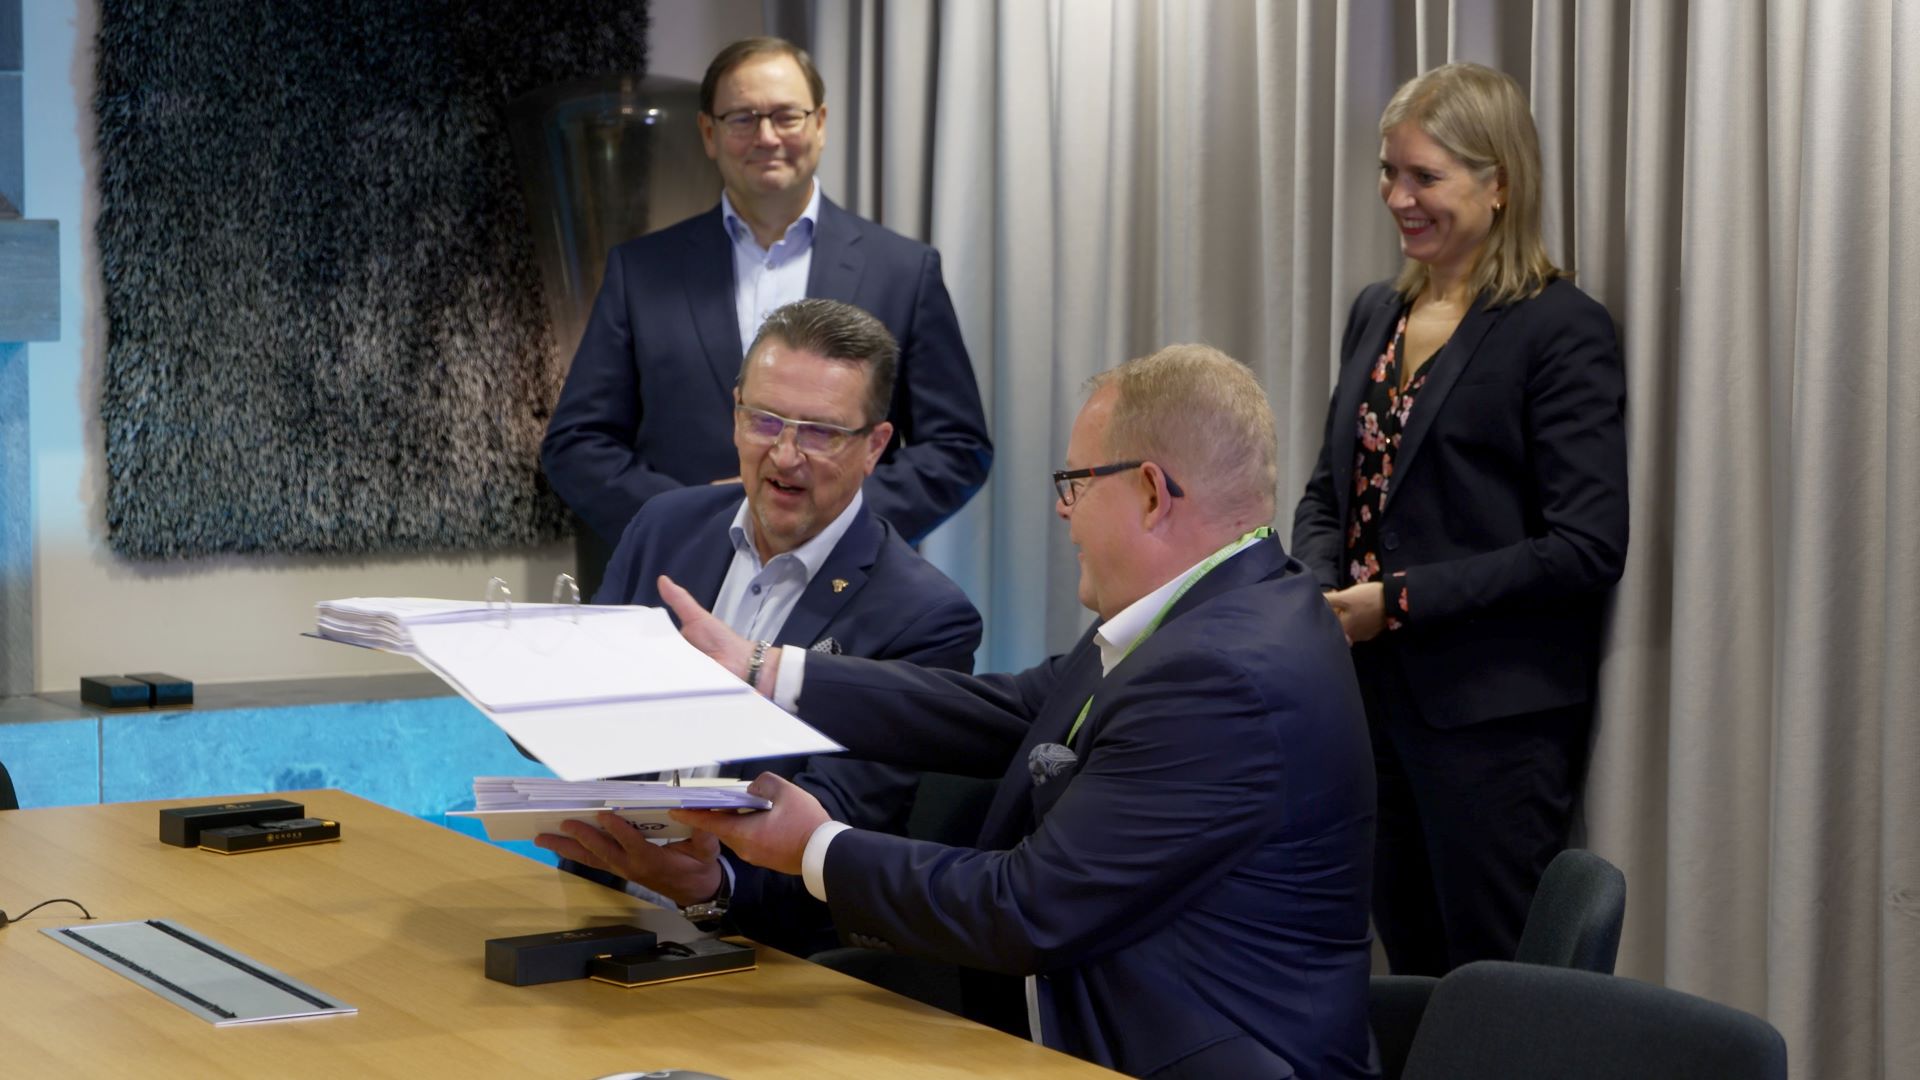 On 20th September 2022 Government ICT Centre Valtori representatives were invited to the official contract-signing ceremony at Elisa Headquarters.